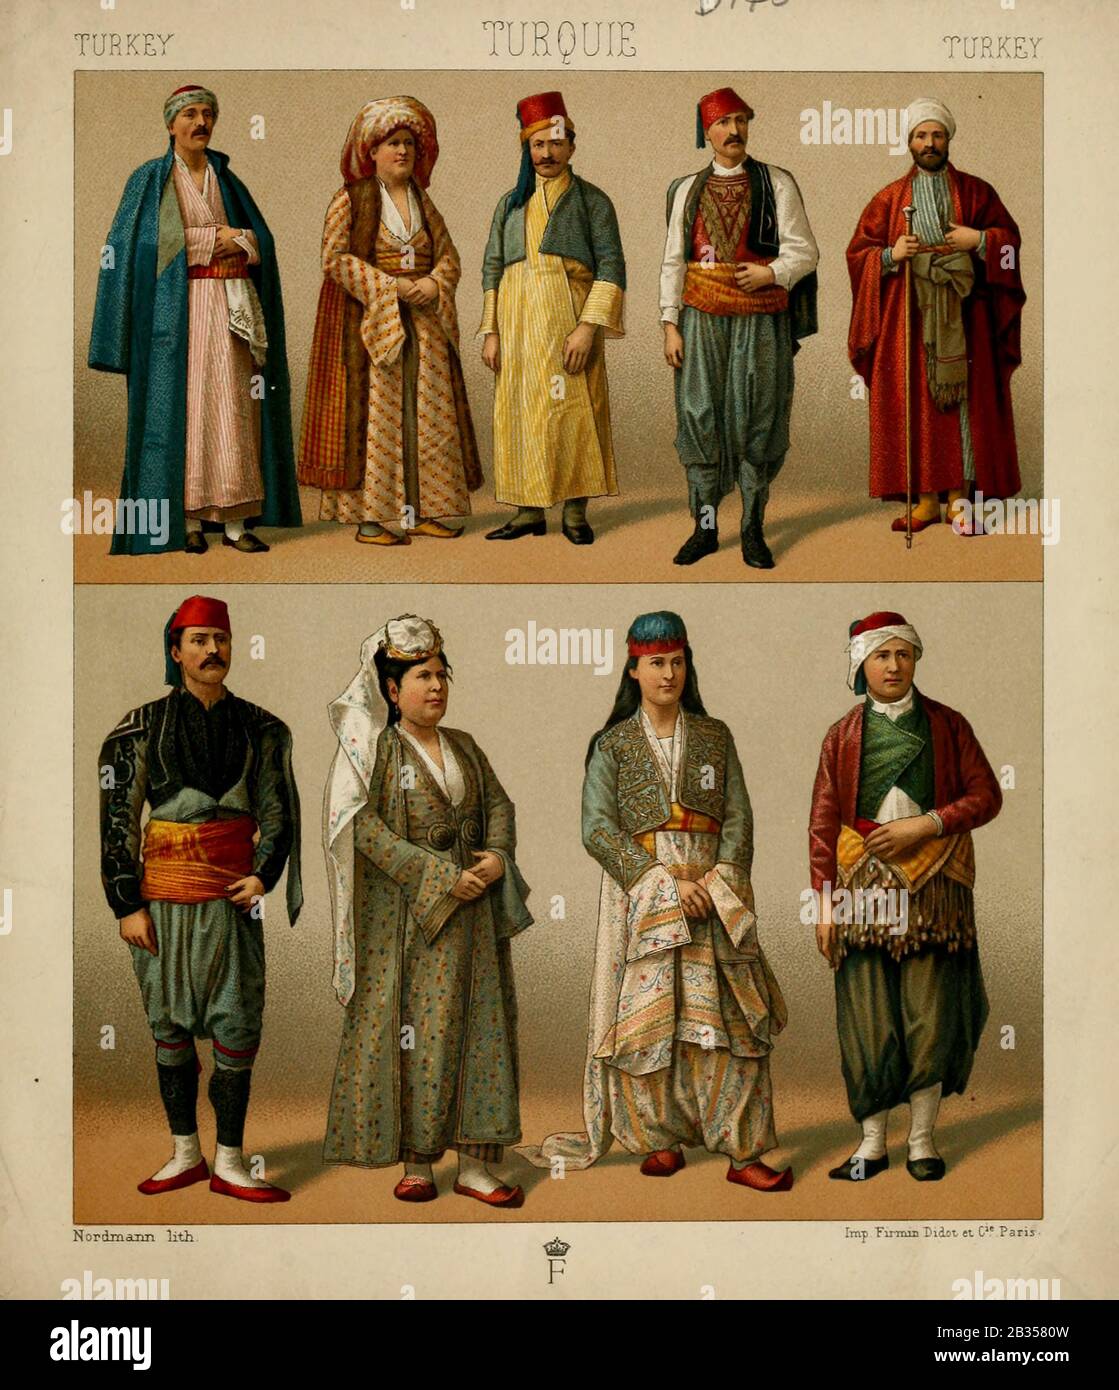 2,862 Turkish National Costume Images, Stock Photos, 3D objects